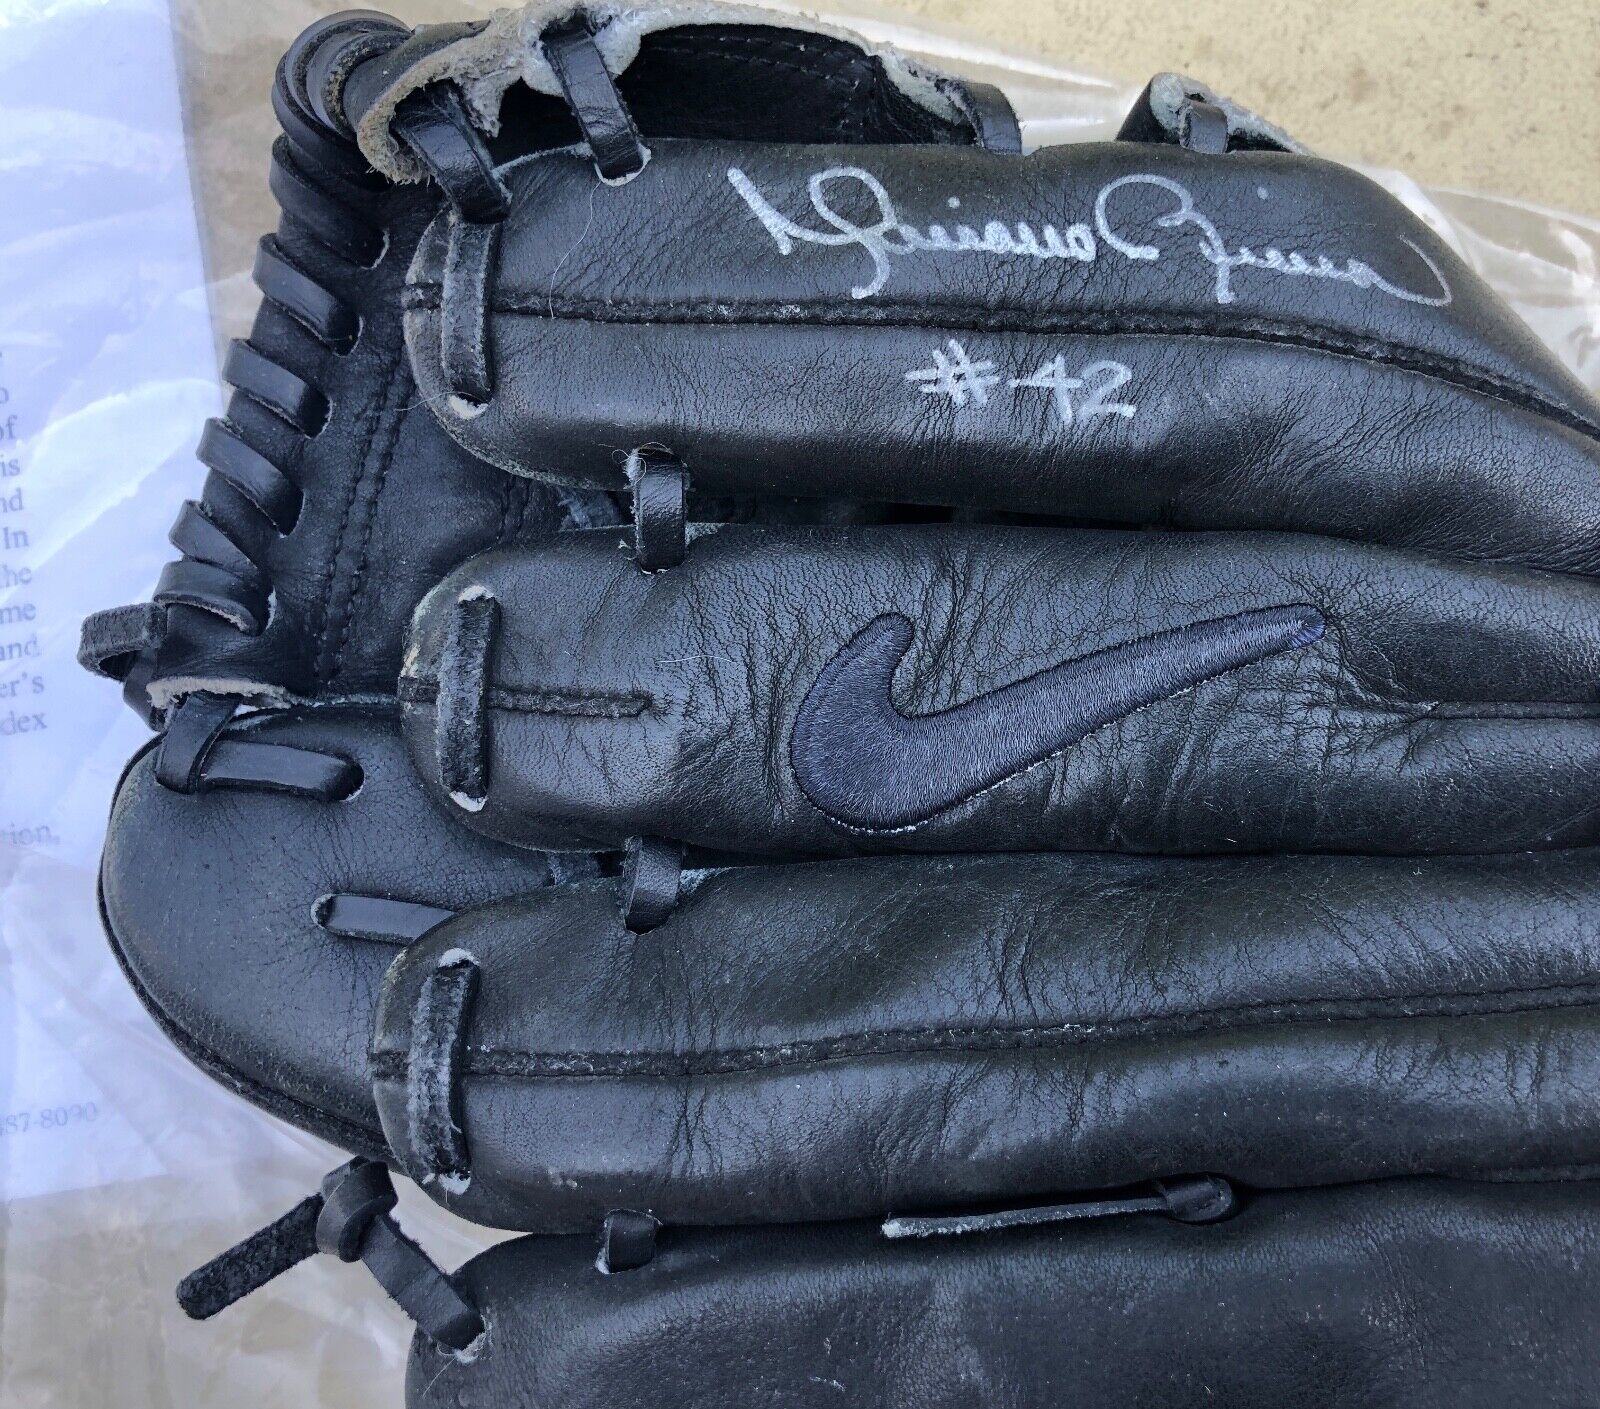 MARIANO RIVERA GAME USED GLOVE 2008-2009 SIGNED AUTHENTICATED- AUTO JSA-1/1 100%